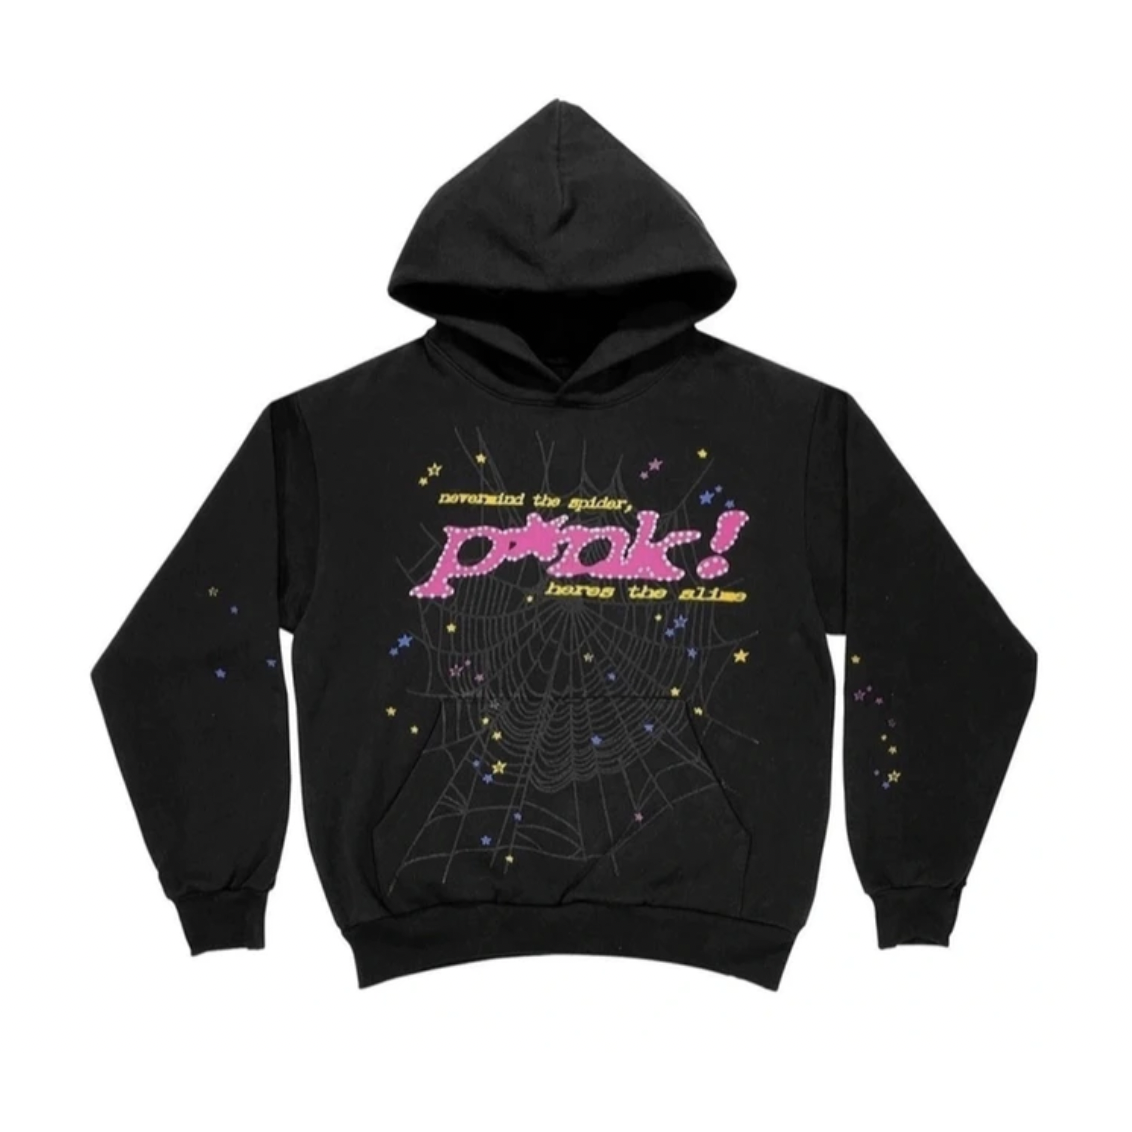 Sp5der P*NK Hoodie Black from Young Thug